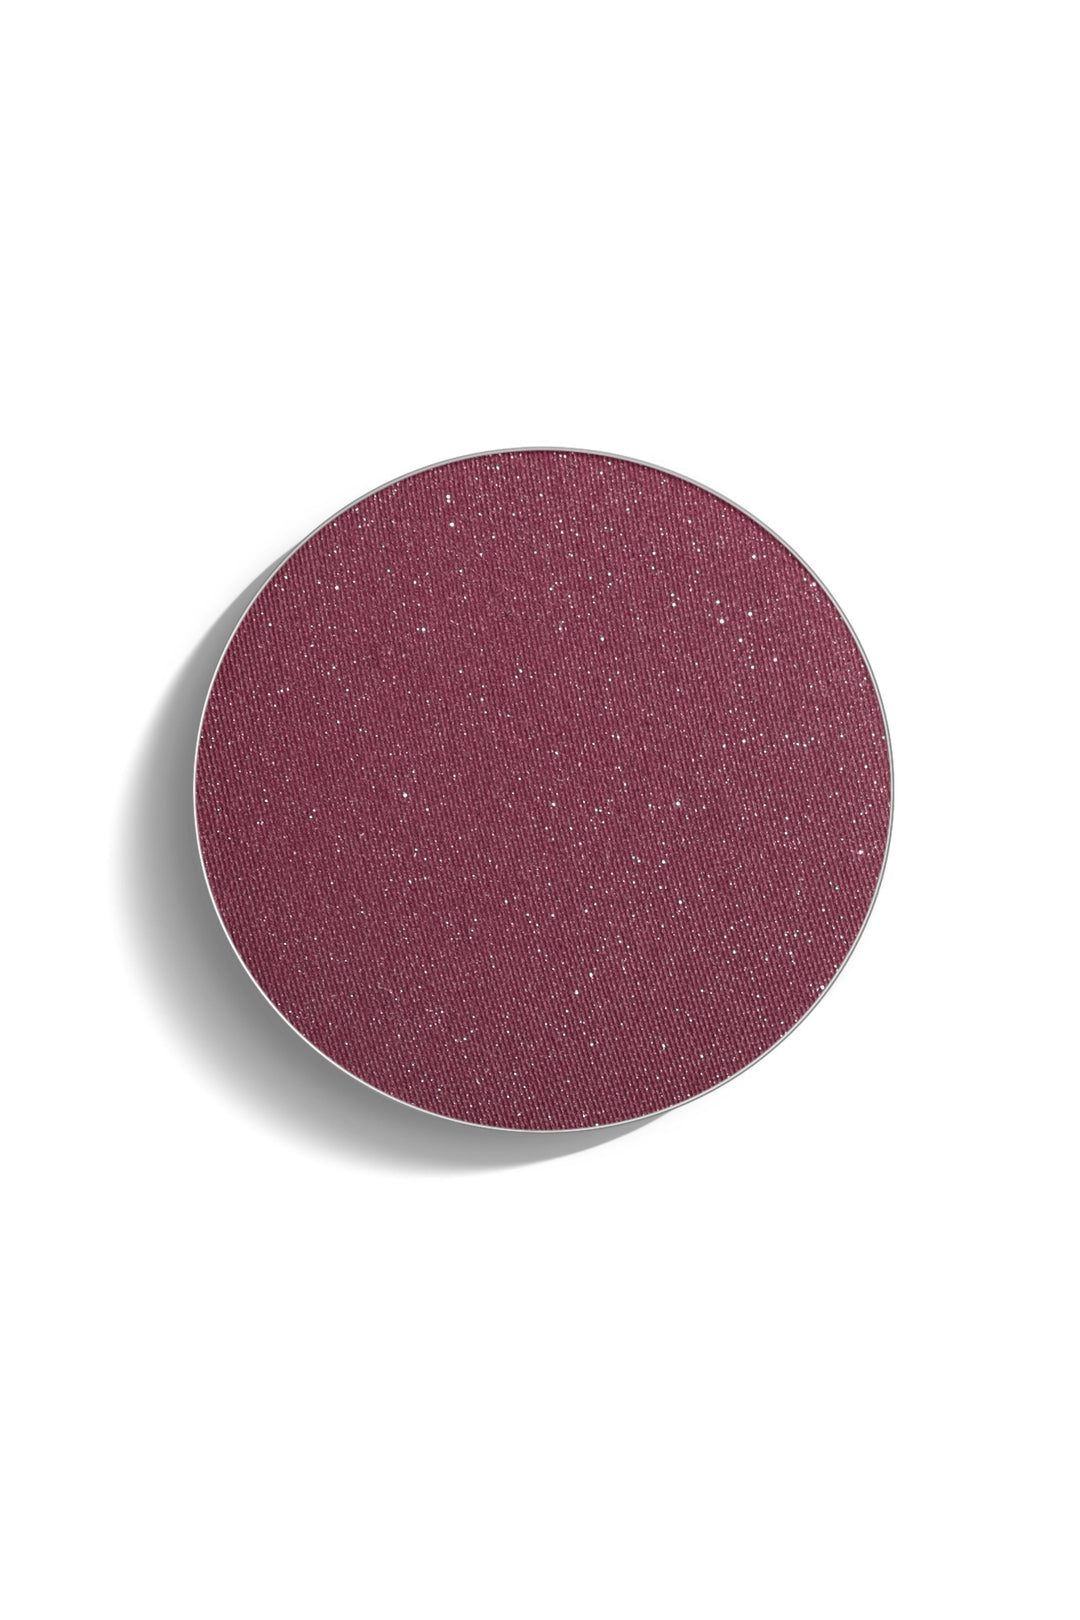 MINERAL PRESSED CHEEK COLOR | REFILL